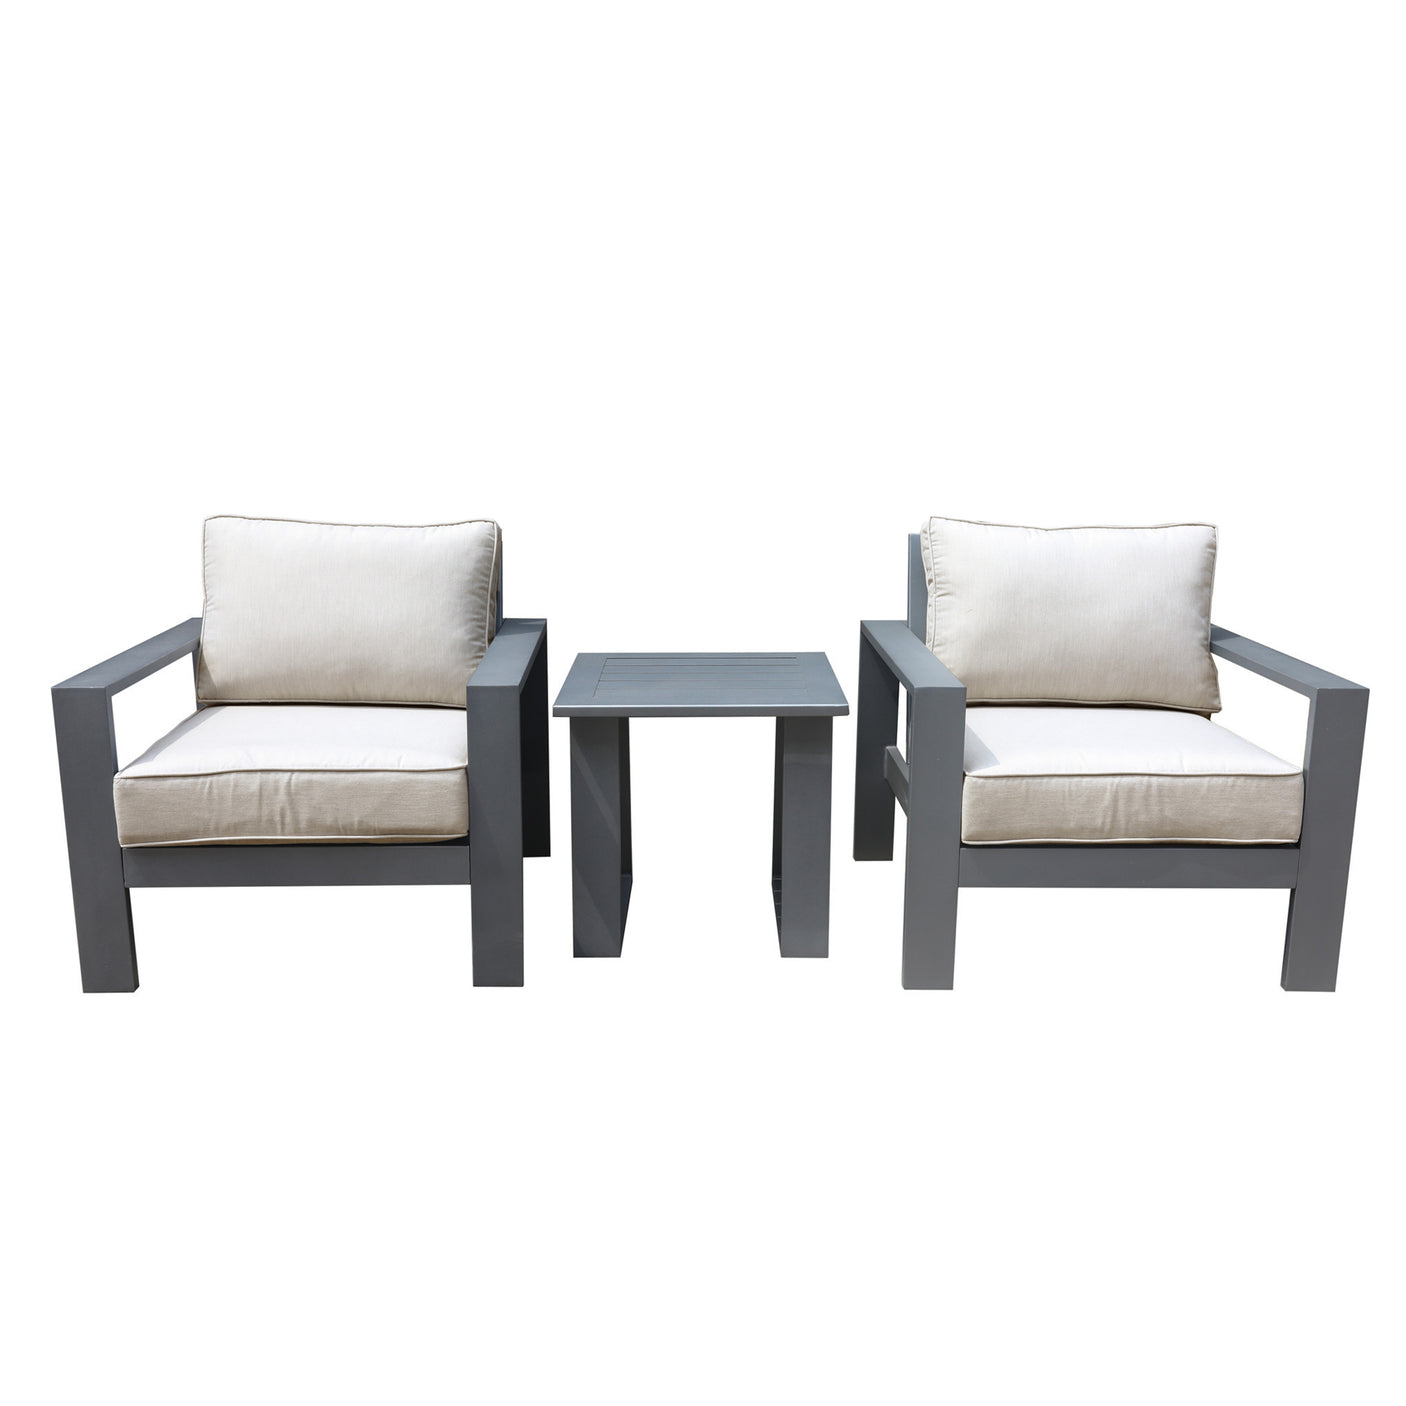 3 Piece Seating Group with Cushions, Powdered Pewter